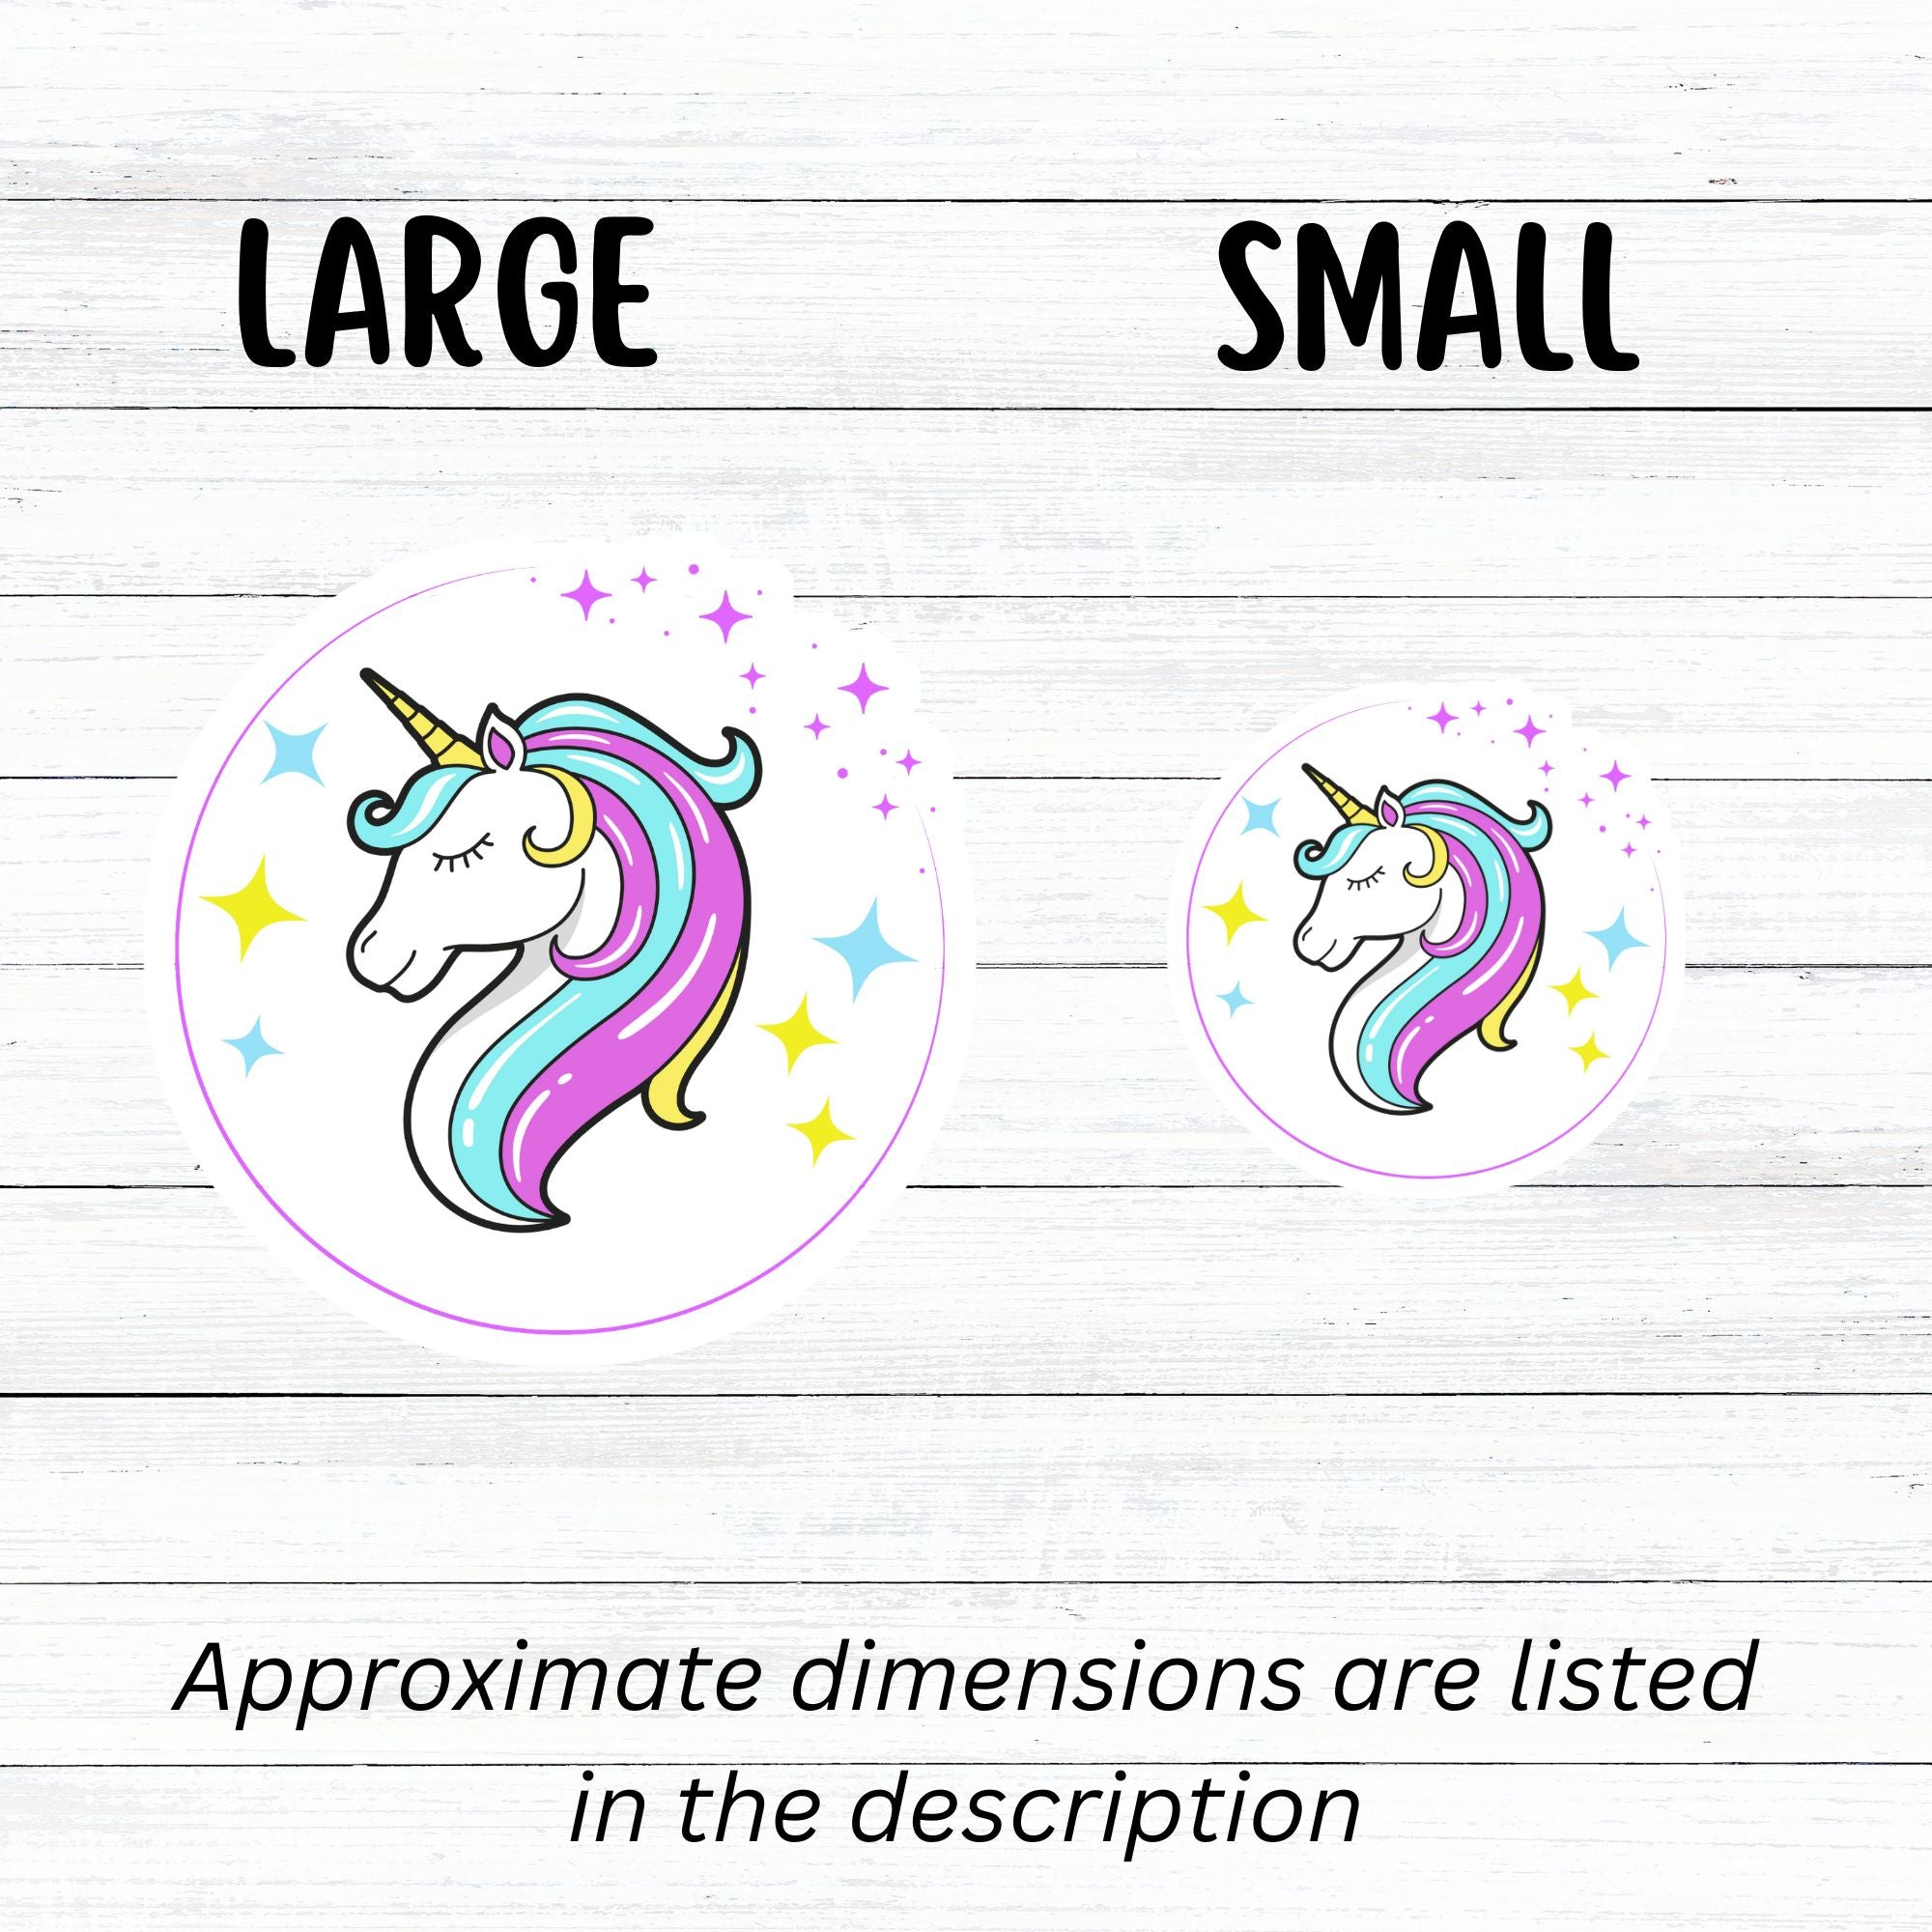 This individual die-cut sticker features a teal and purple unicorn with stars in the background. This image shows large and small Unicorn stickers next to each other.